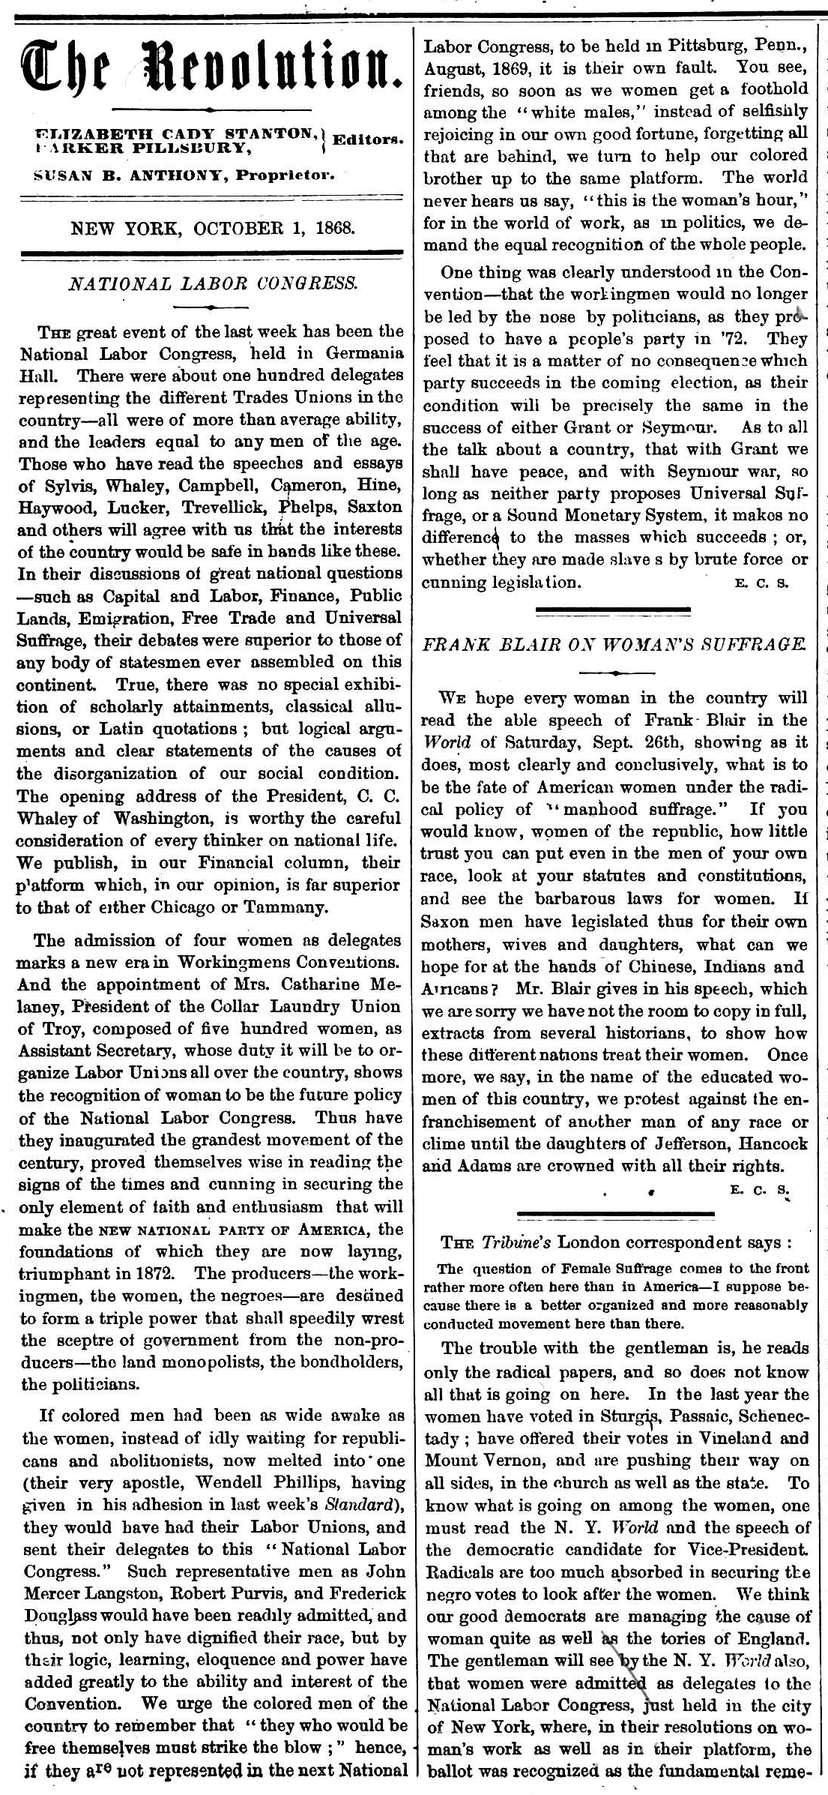 The-Revolution-Susan-B.-Anthony's-Suffrage-Women's-Rights-Newspaper-October-1,-1868